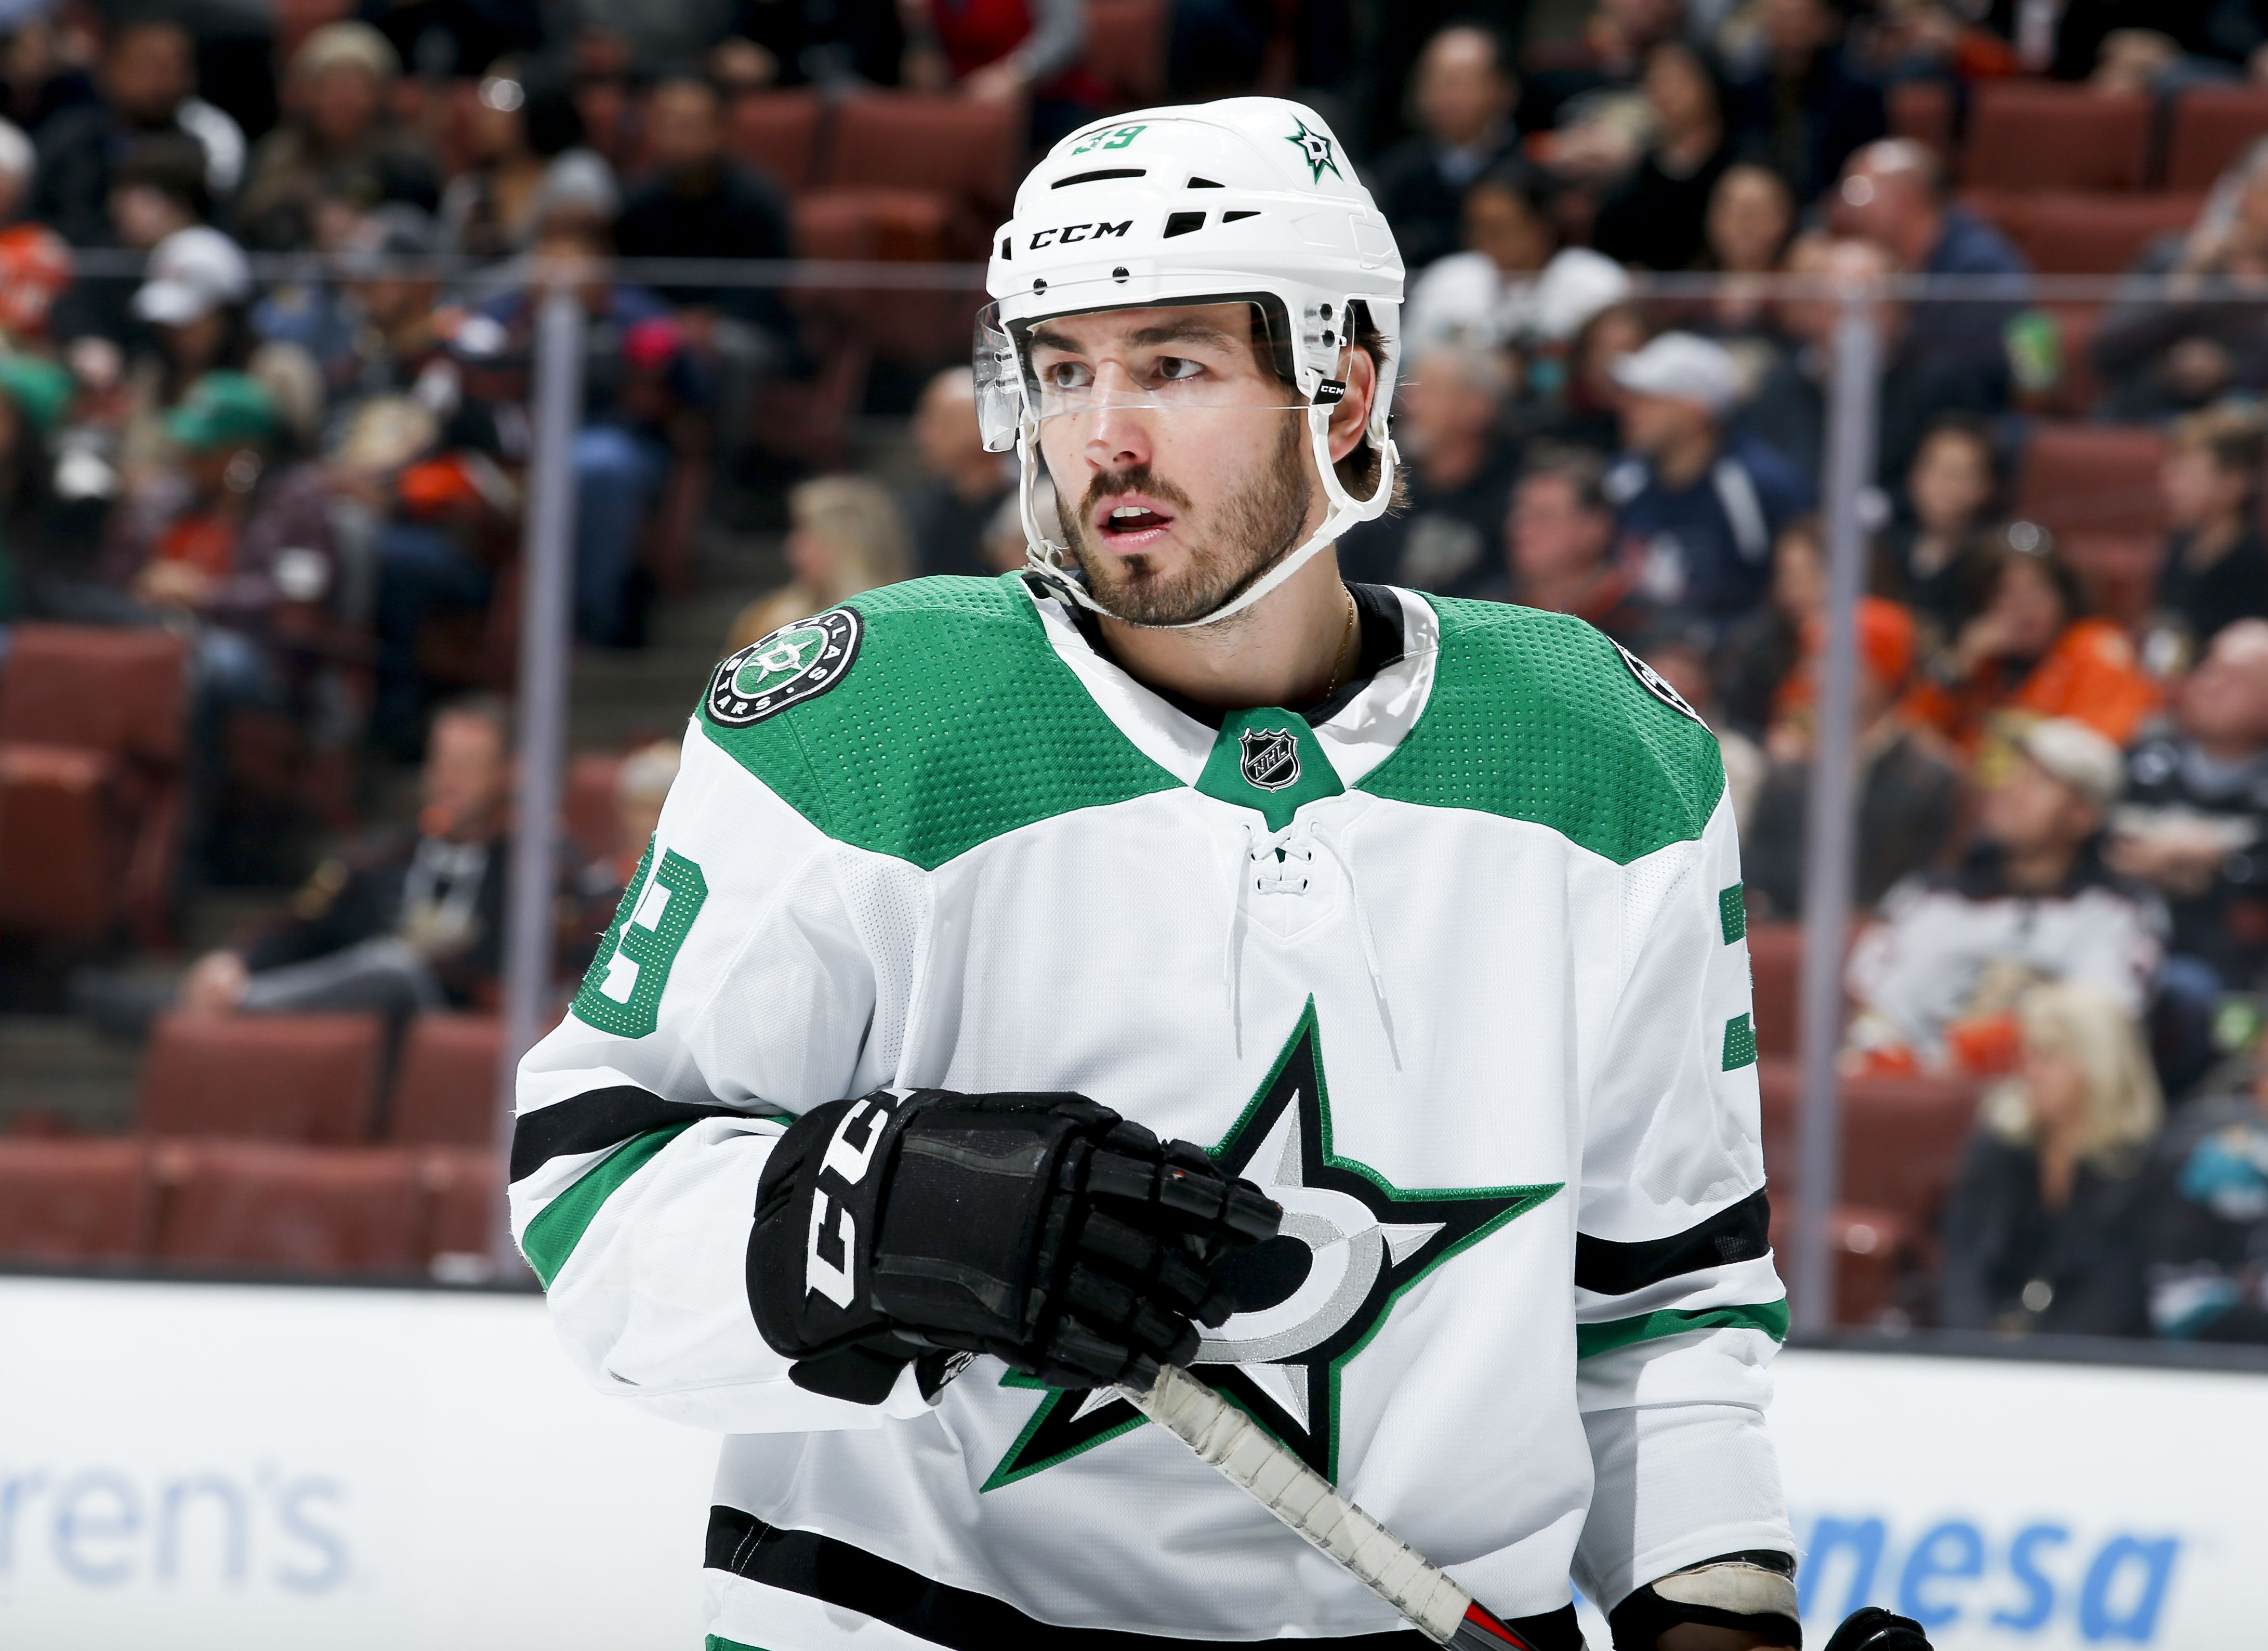 Dallas Stars: Texas Hockey Day Helps Players Give Back, Grow Game